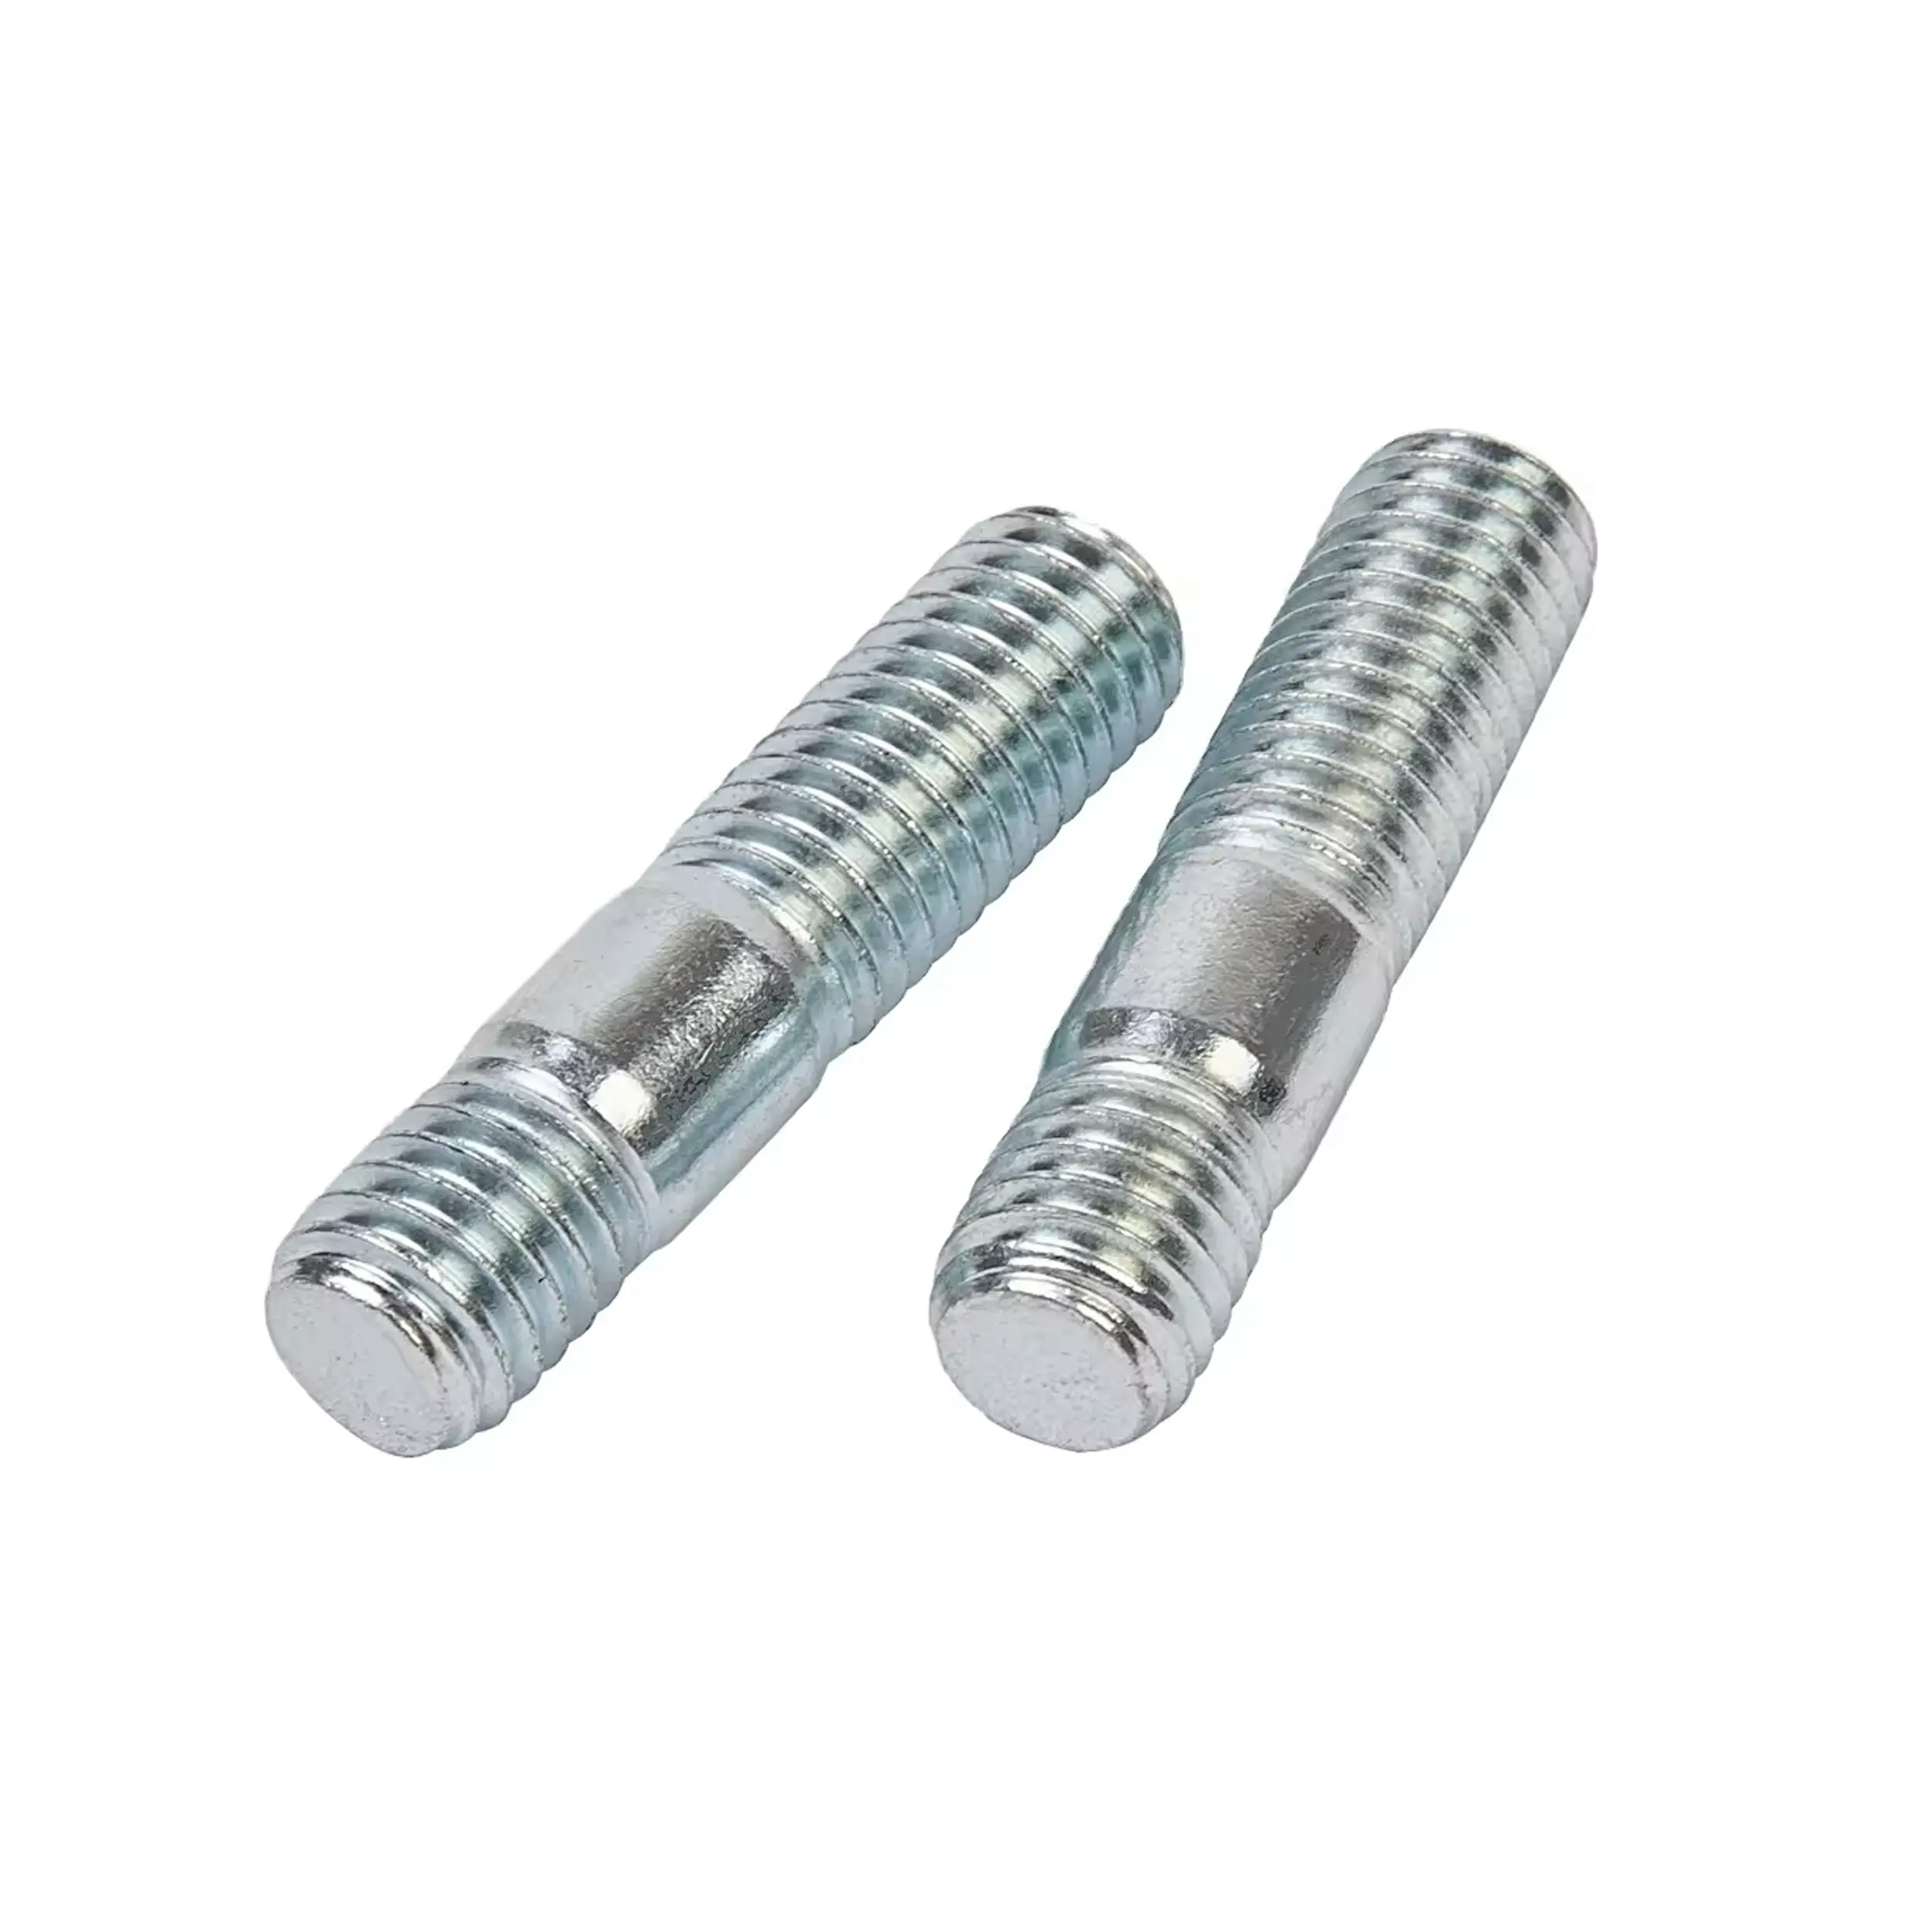 Hot Selling M5-M48 4.8 Grade Rigid Performance Thick Teeth At Both Ends Ordinary Threaded Thin Rod Double Headed Studs